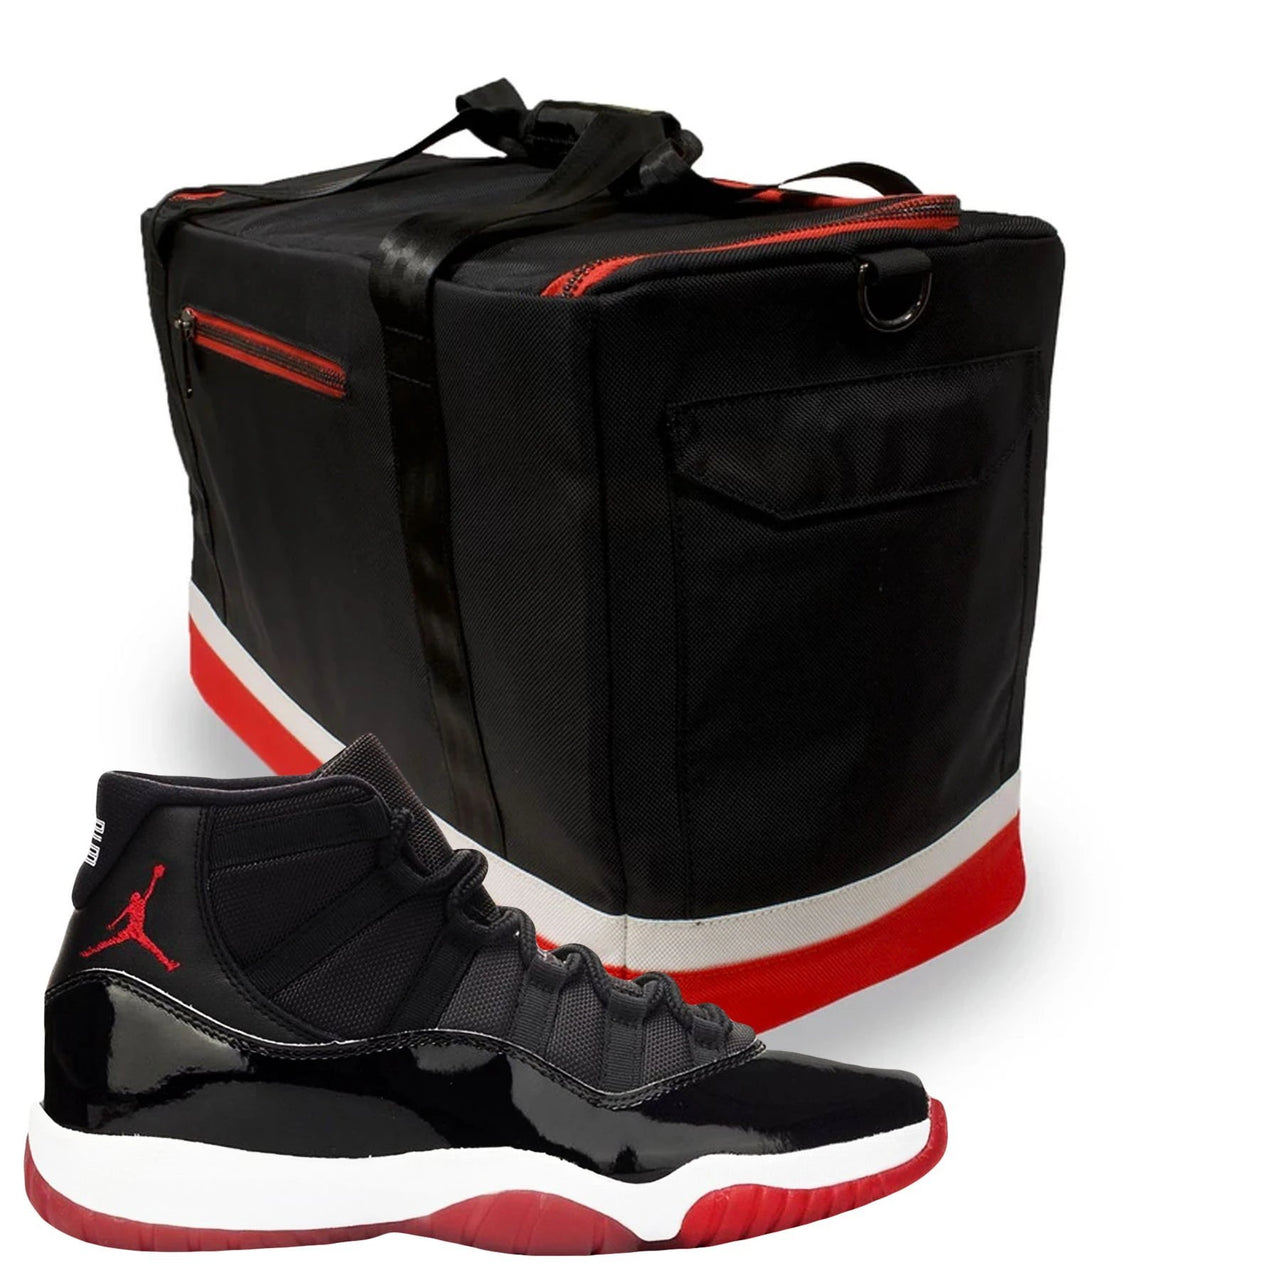 The Foot Clan Jordan 11 Bred Sneaker Matching Sneaker Duffle Bag is black, white, and red with patent leather accents